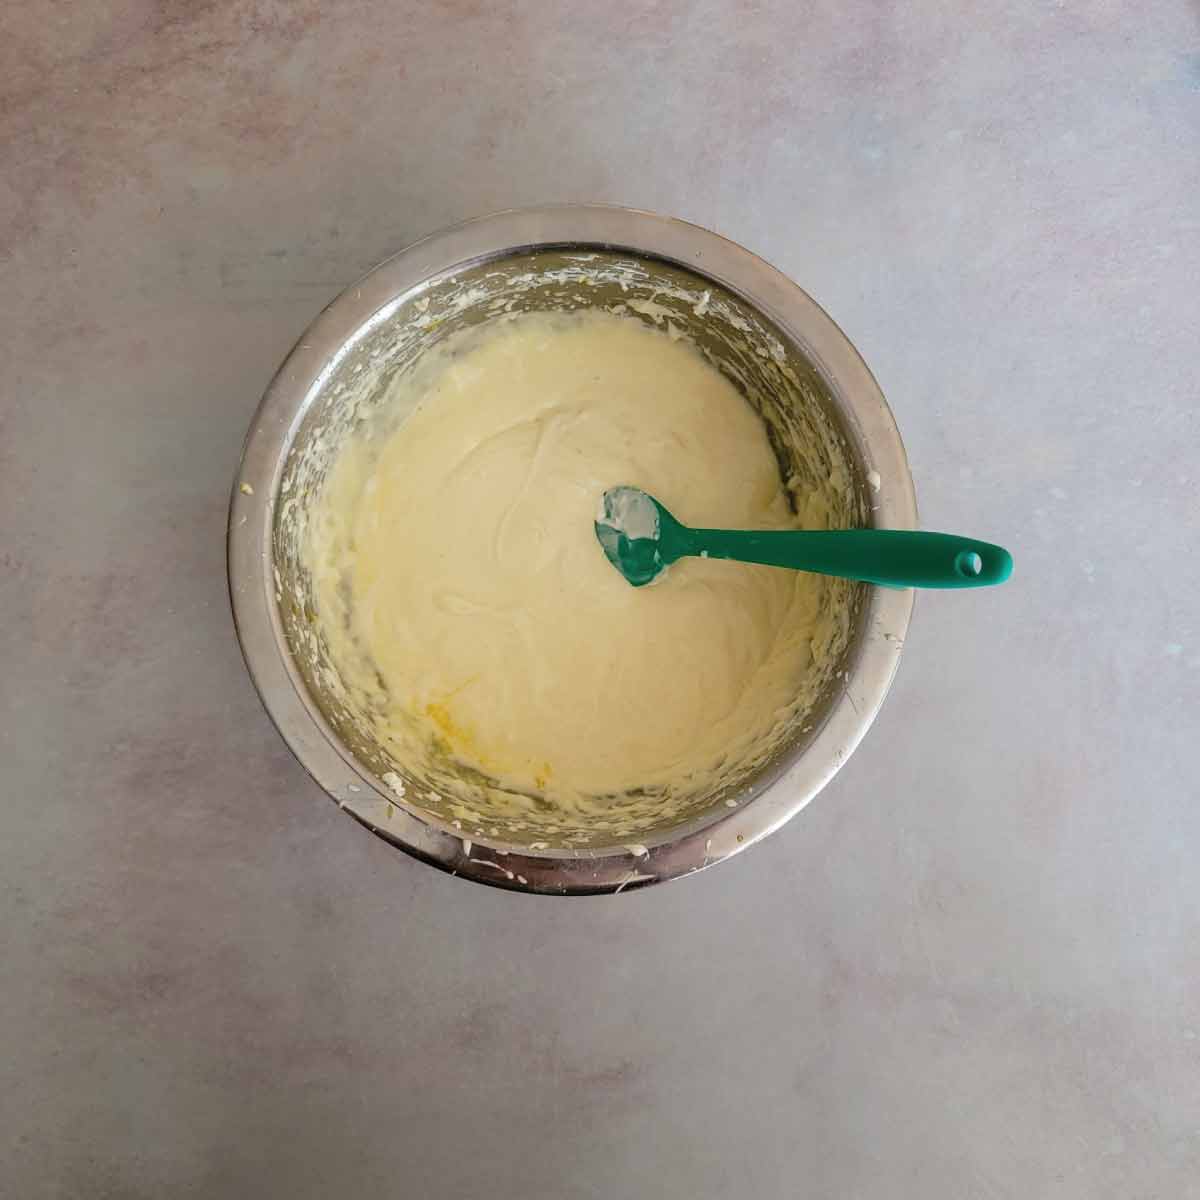 Cheesecake batter after using the mixer with just a little bit of egg needing to be stirred with a spatula so not to over beat it.